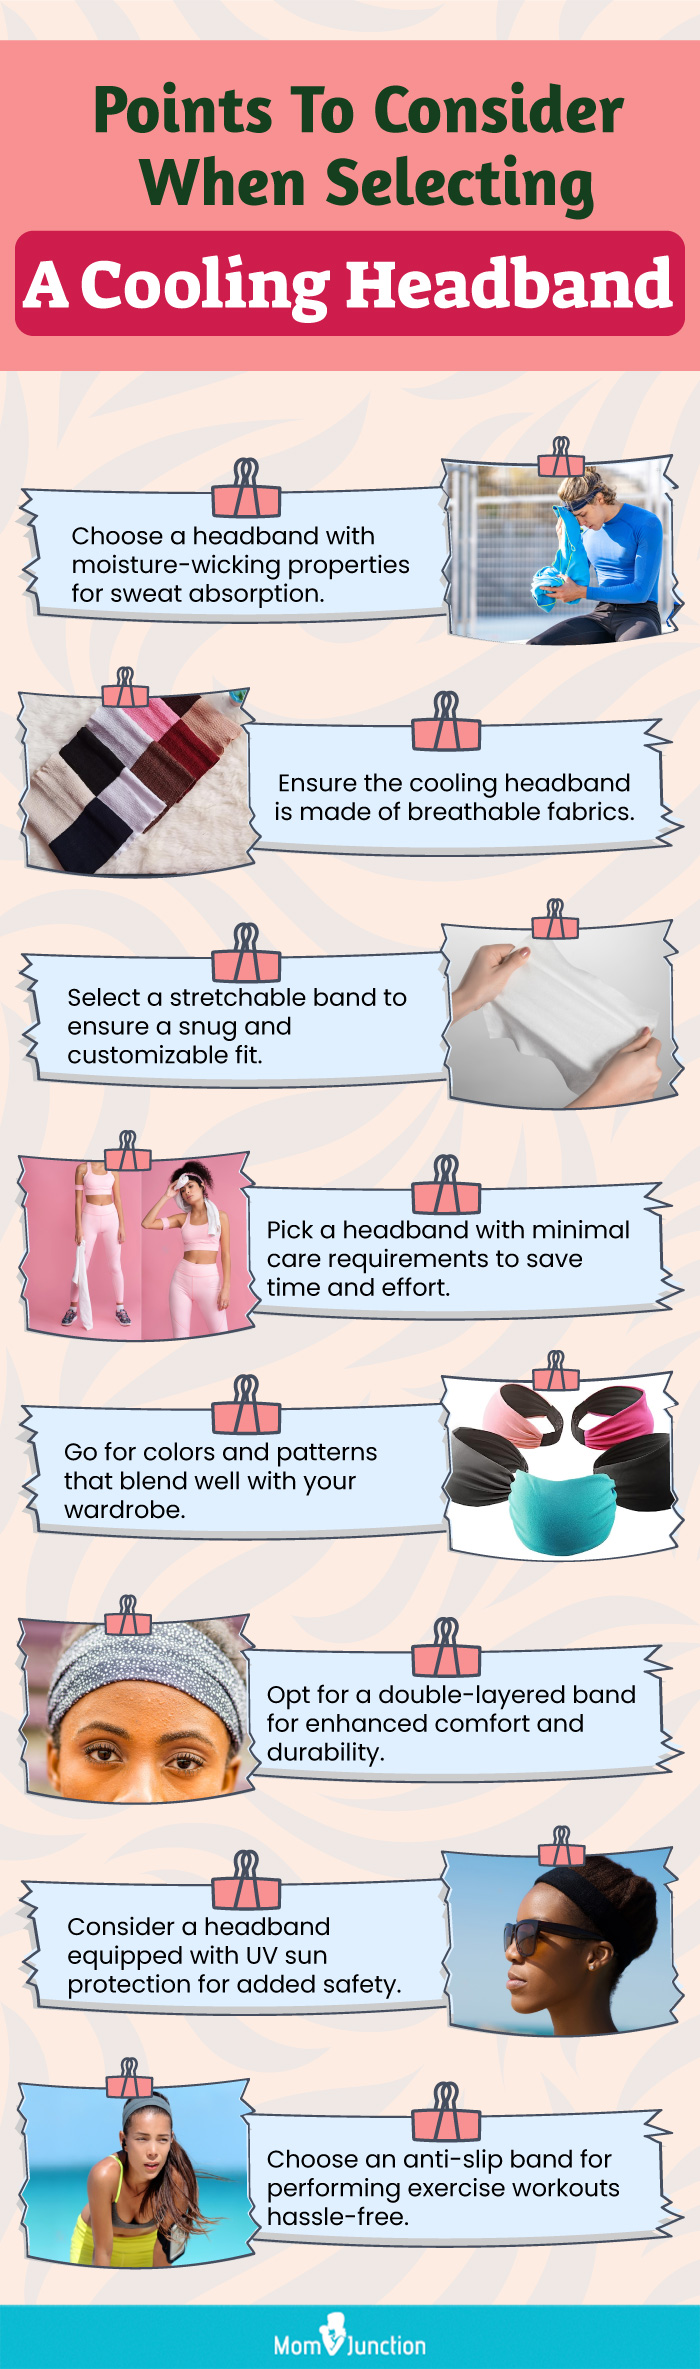 Points To Consider When Selecting a Cooling Headband (infographic)